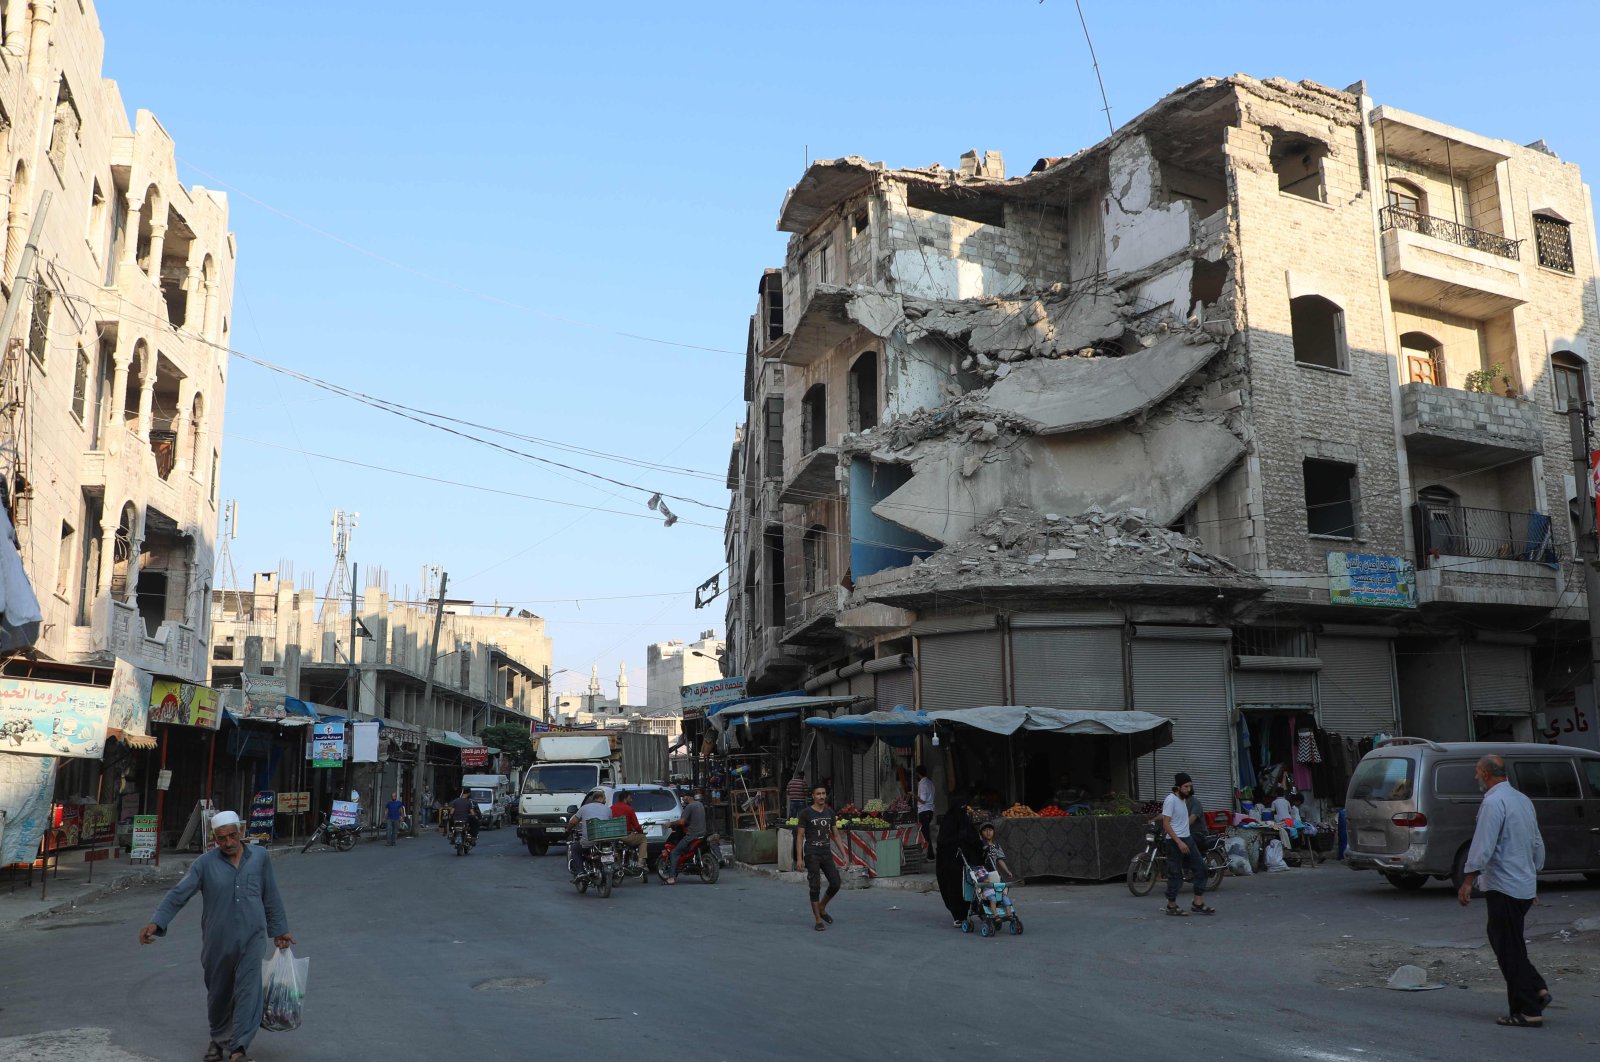 People walk near heavily damaged buildings due to the Syrian regime's attacks in the opposition-held city of Idlib in northwestern Syria on September 16, 2019. (AFP Photo)